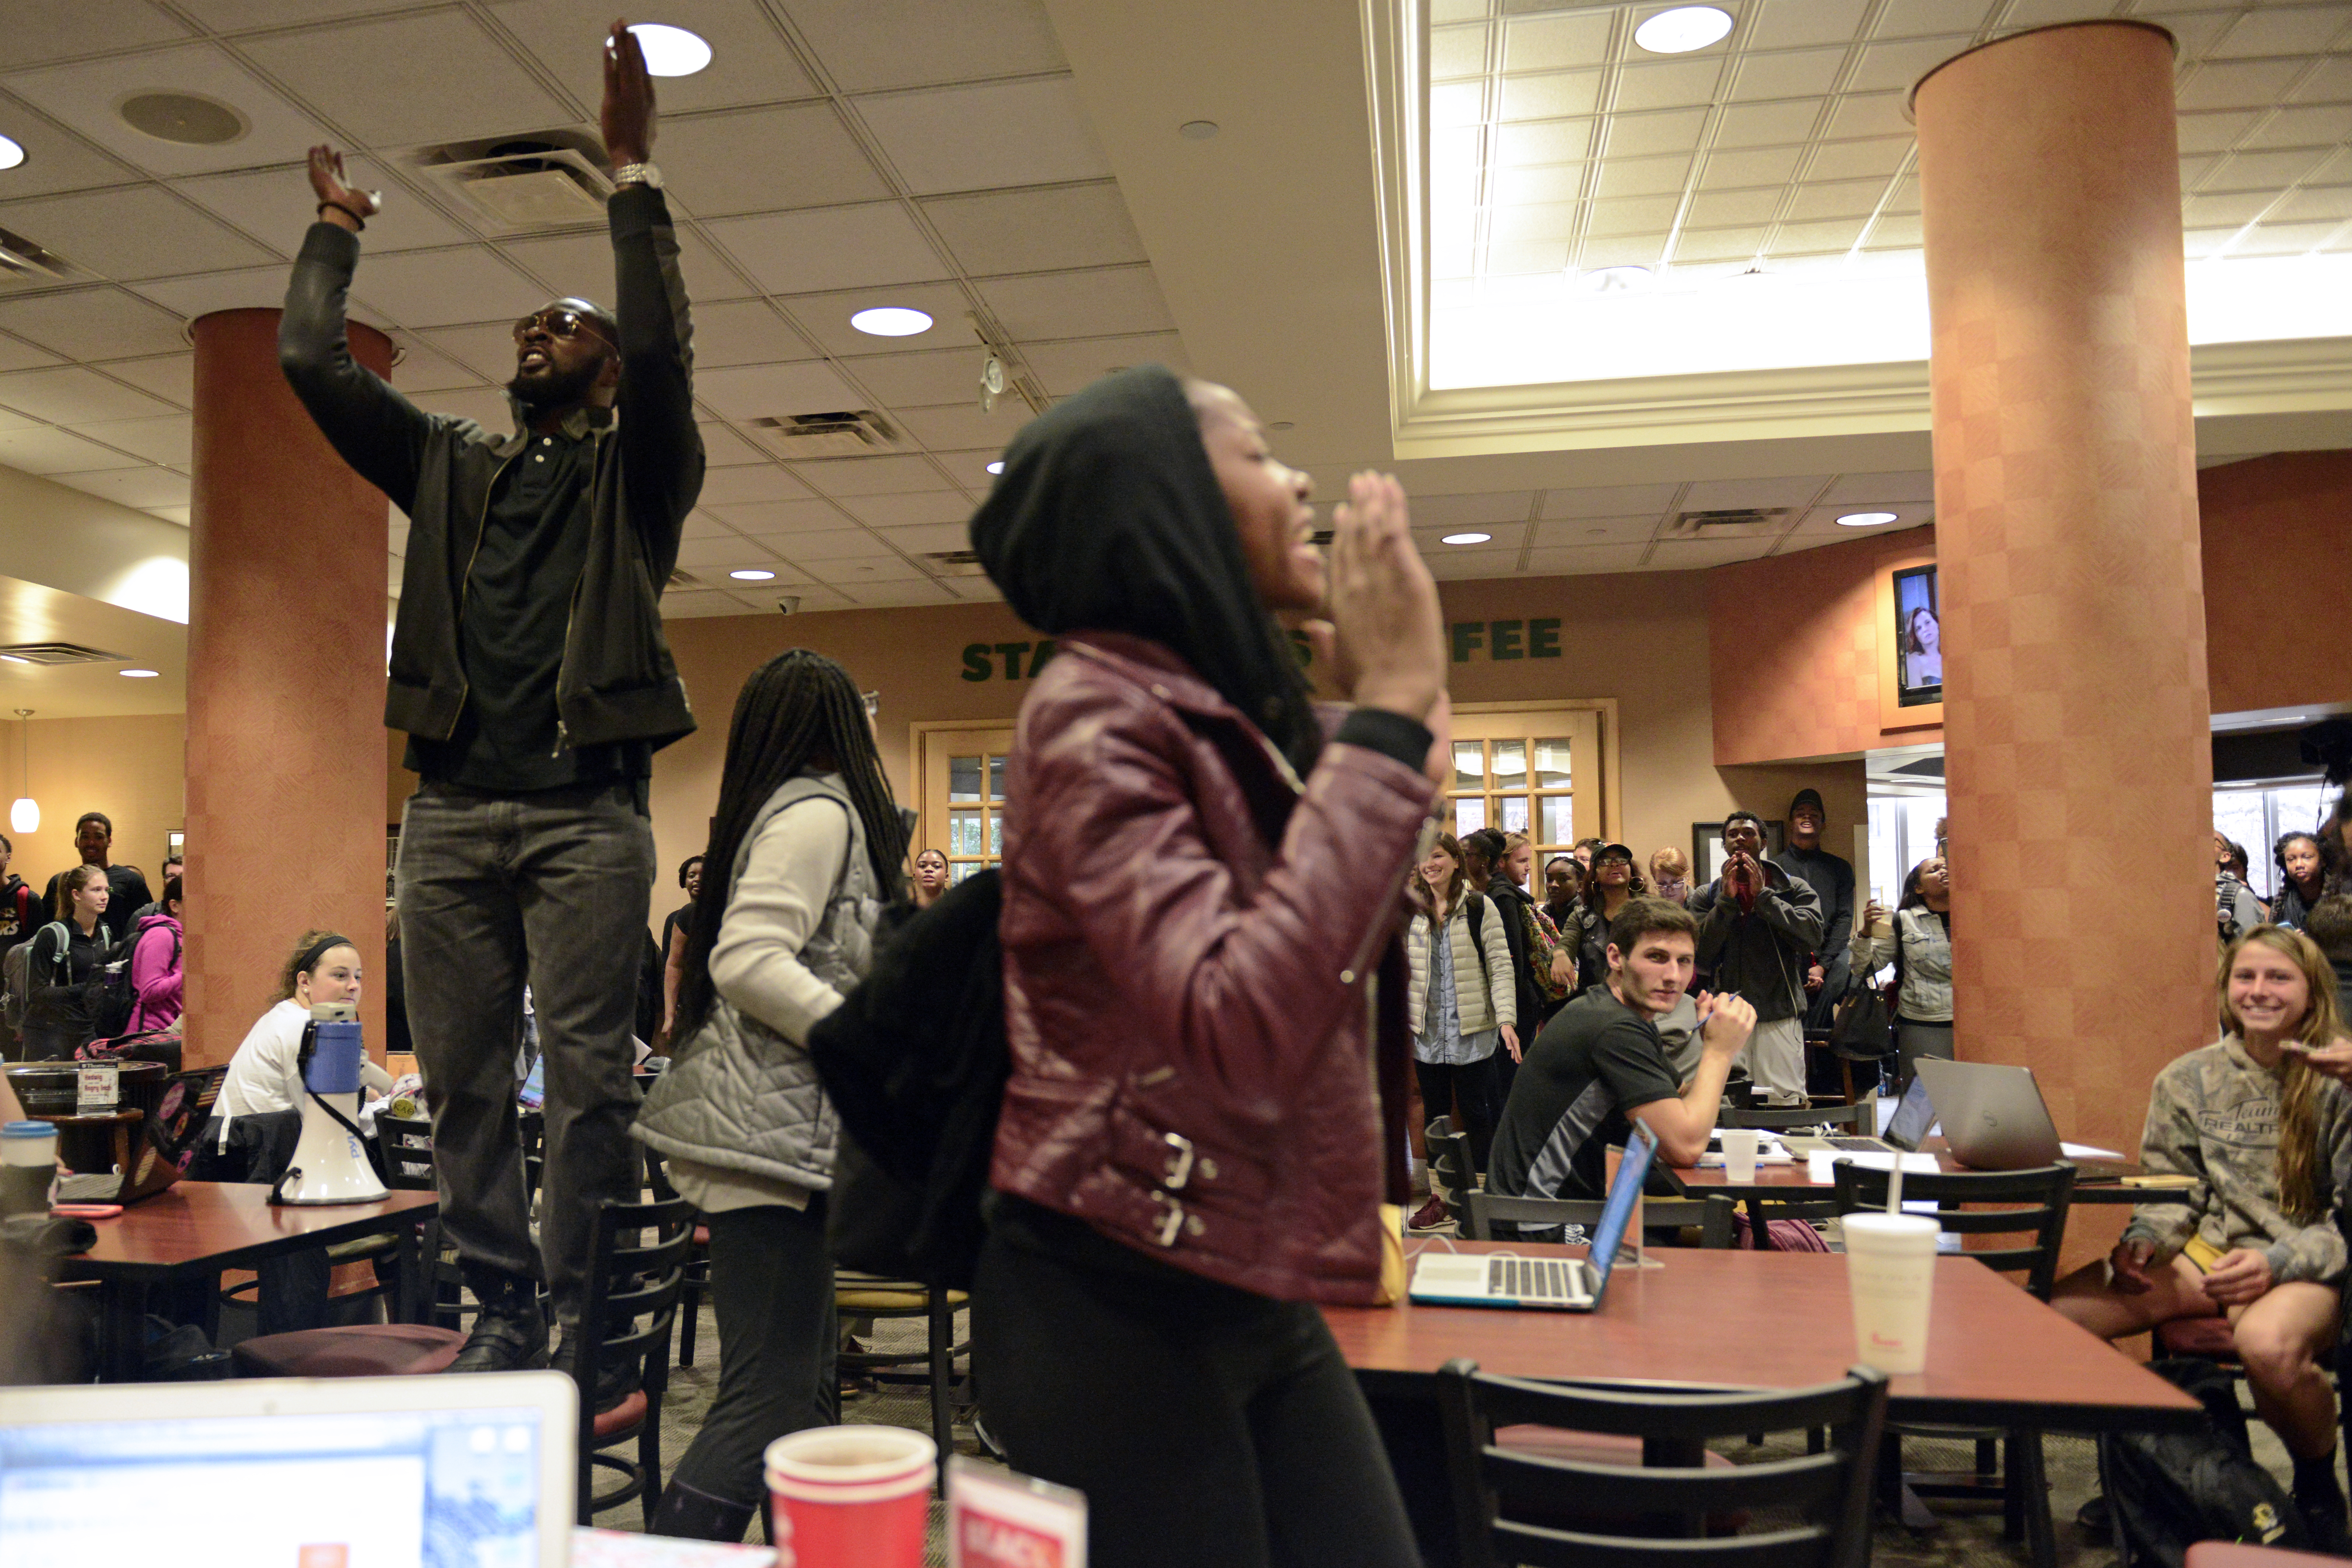 Concerned Student 1950 members chant inside Memorial Union on Nov. 4, 2015. The march took students through various buildings that they viewed as money-making entities for the university.